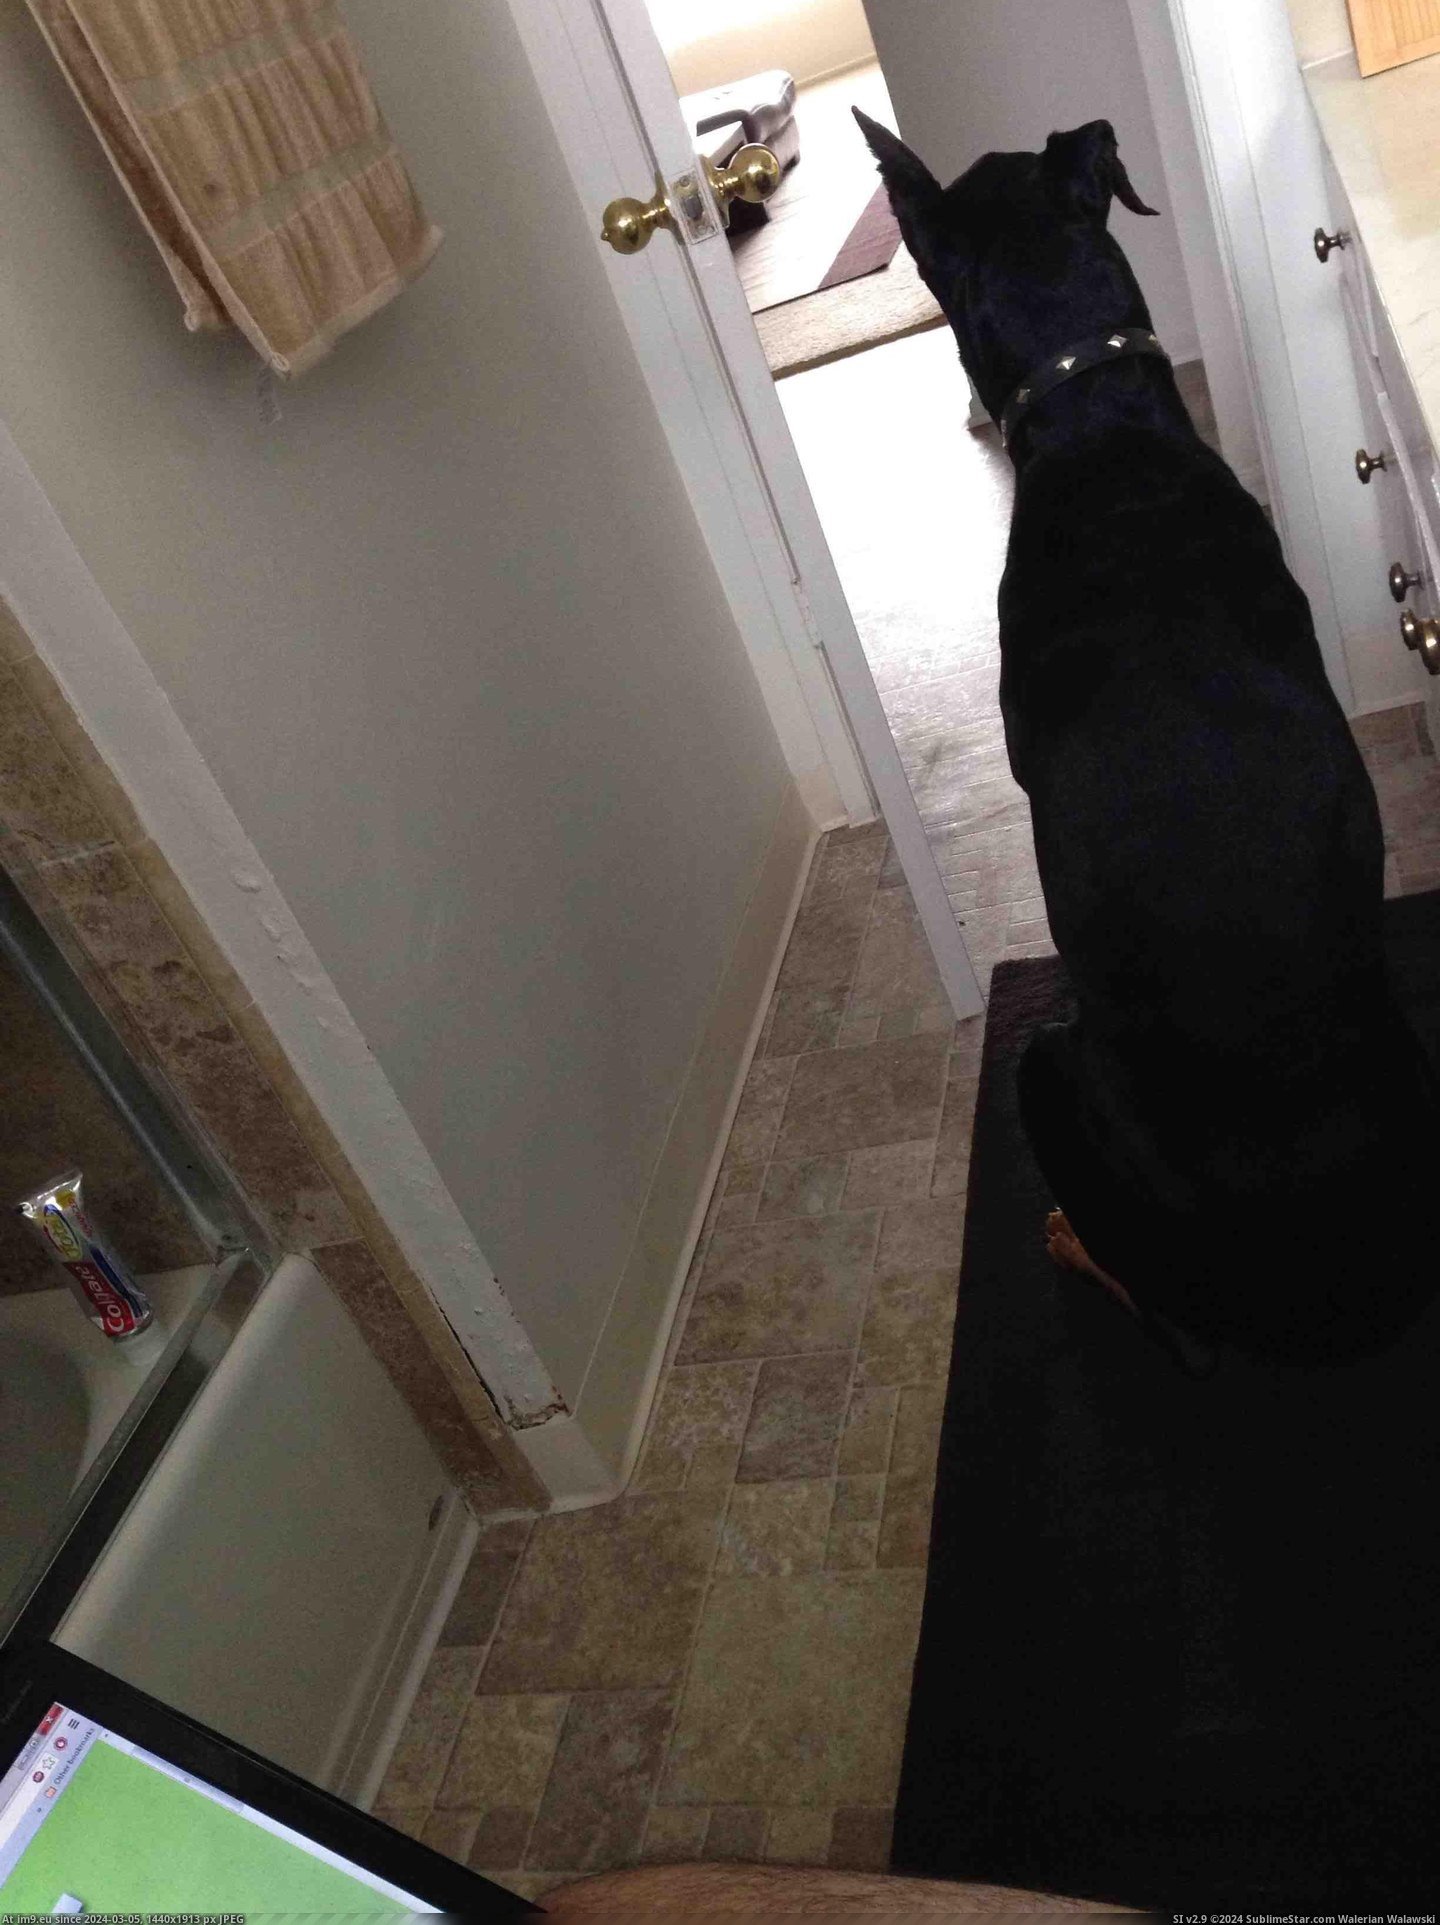 #Funny #Now #Parent #Pooping #Doberman #Thanksgiving #Security [Funny] Took my parent's Doberman home after Thanksgiving. I now have security while pooping. Pic. (Изображение из альбом My r/FUNNY favs))